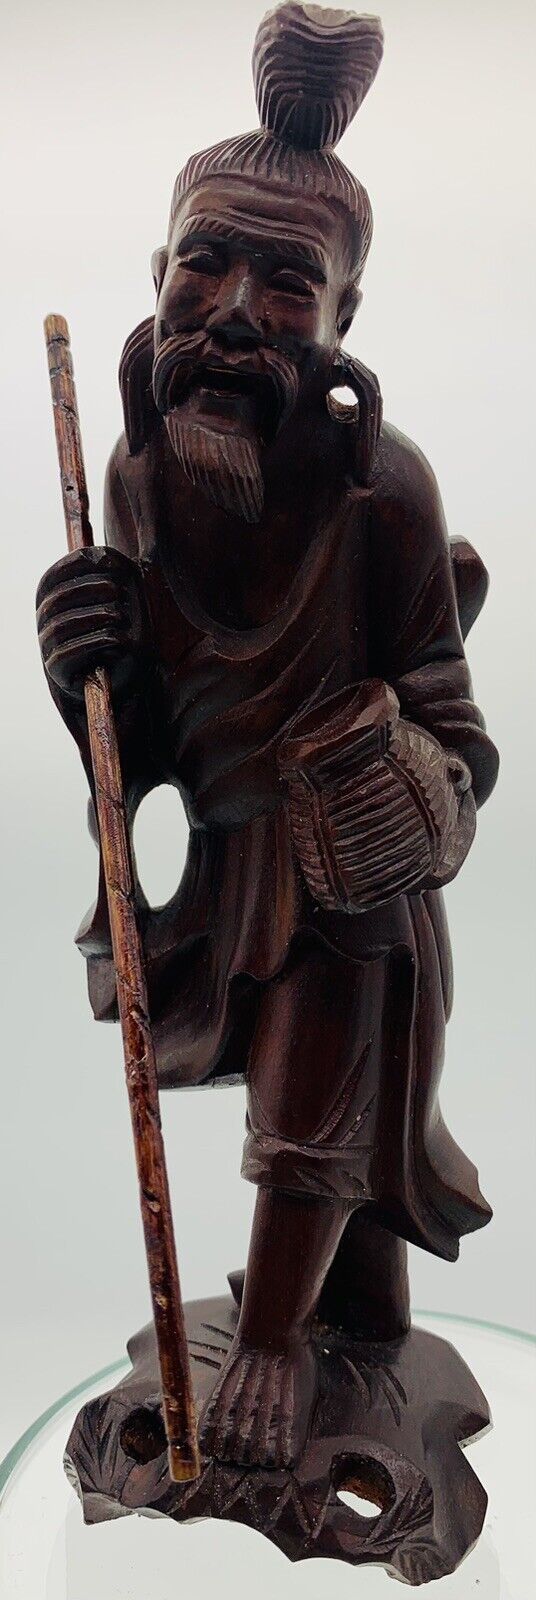 Vintage Chinese Wood Carving Wise Man with Basket & Staff Old Folk Art 8”High.